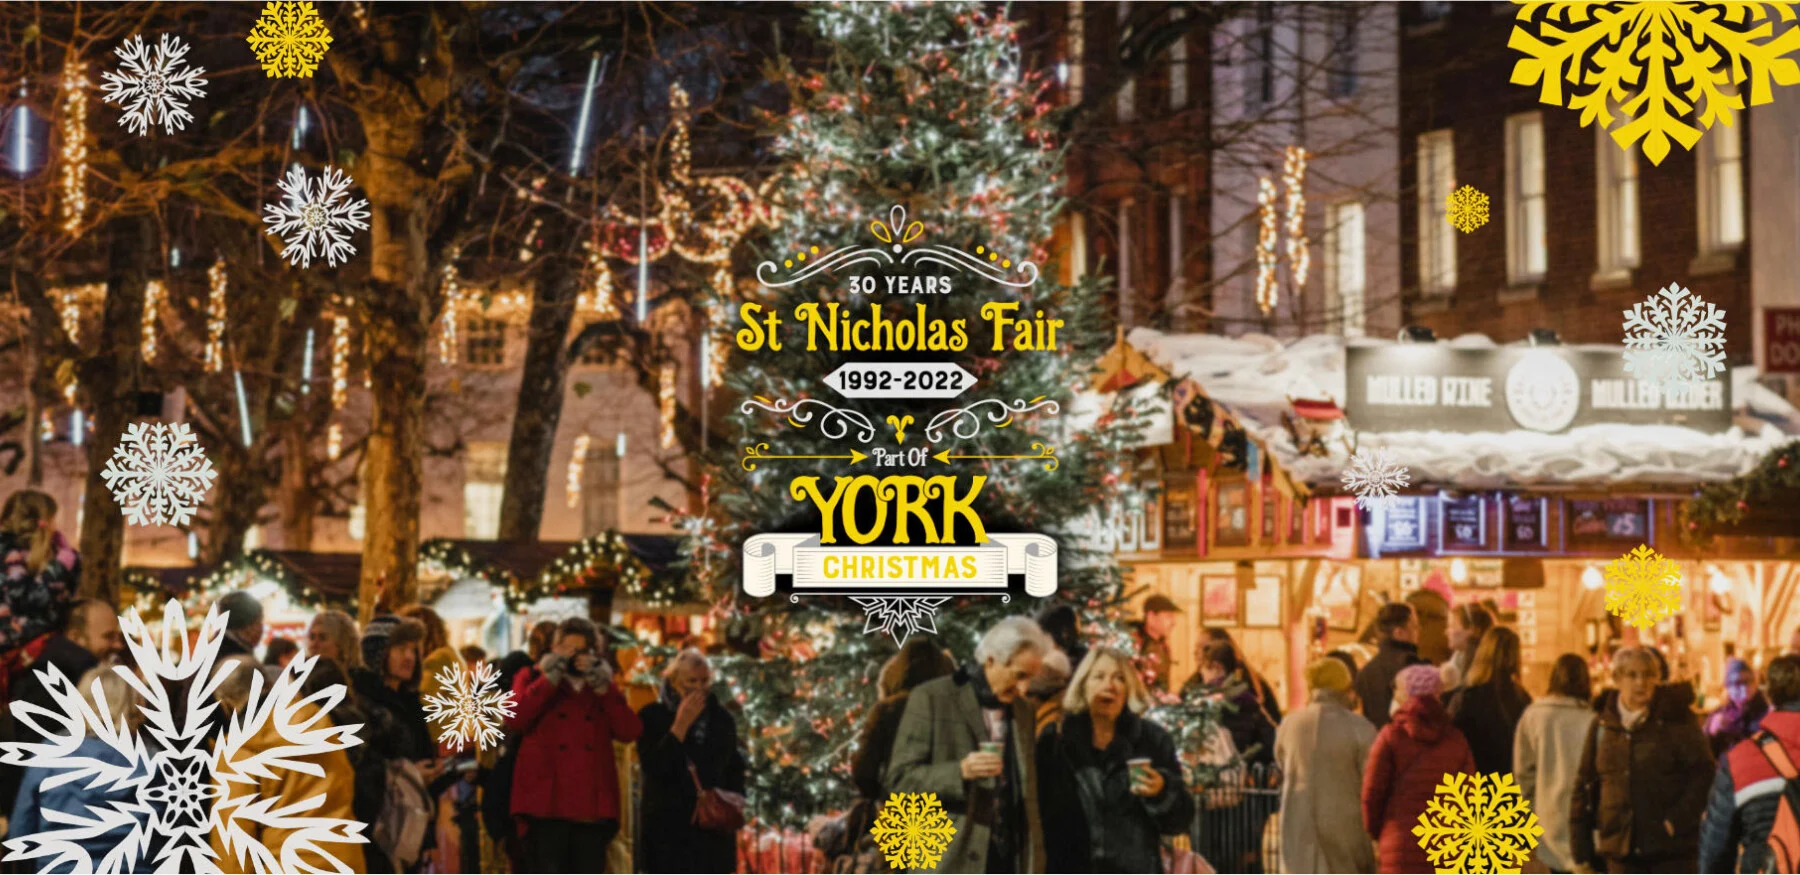 York Christmas fair with local businesses selling everything from handmade gifts to delicious treats.